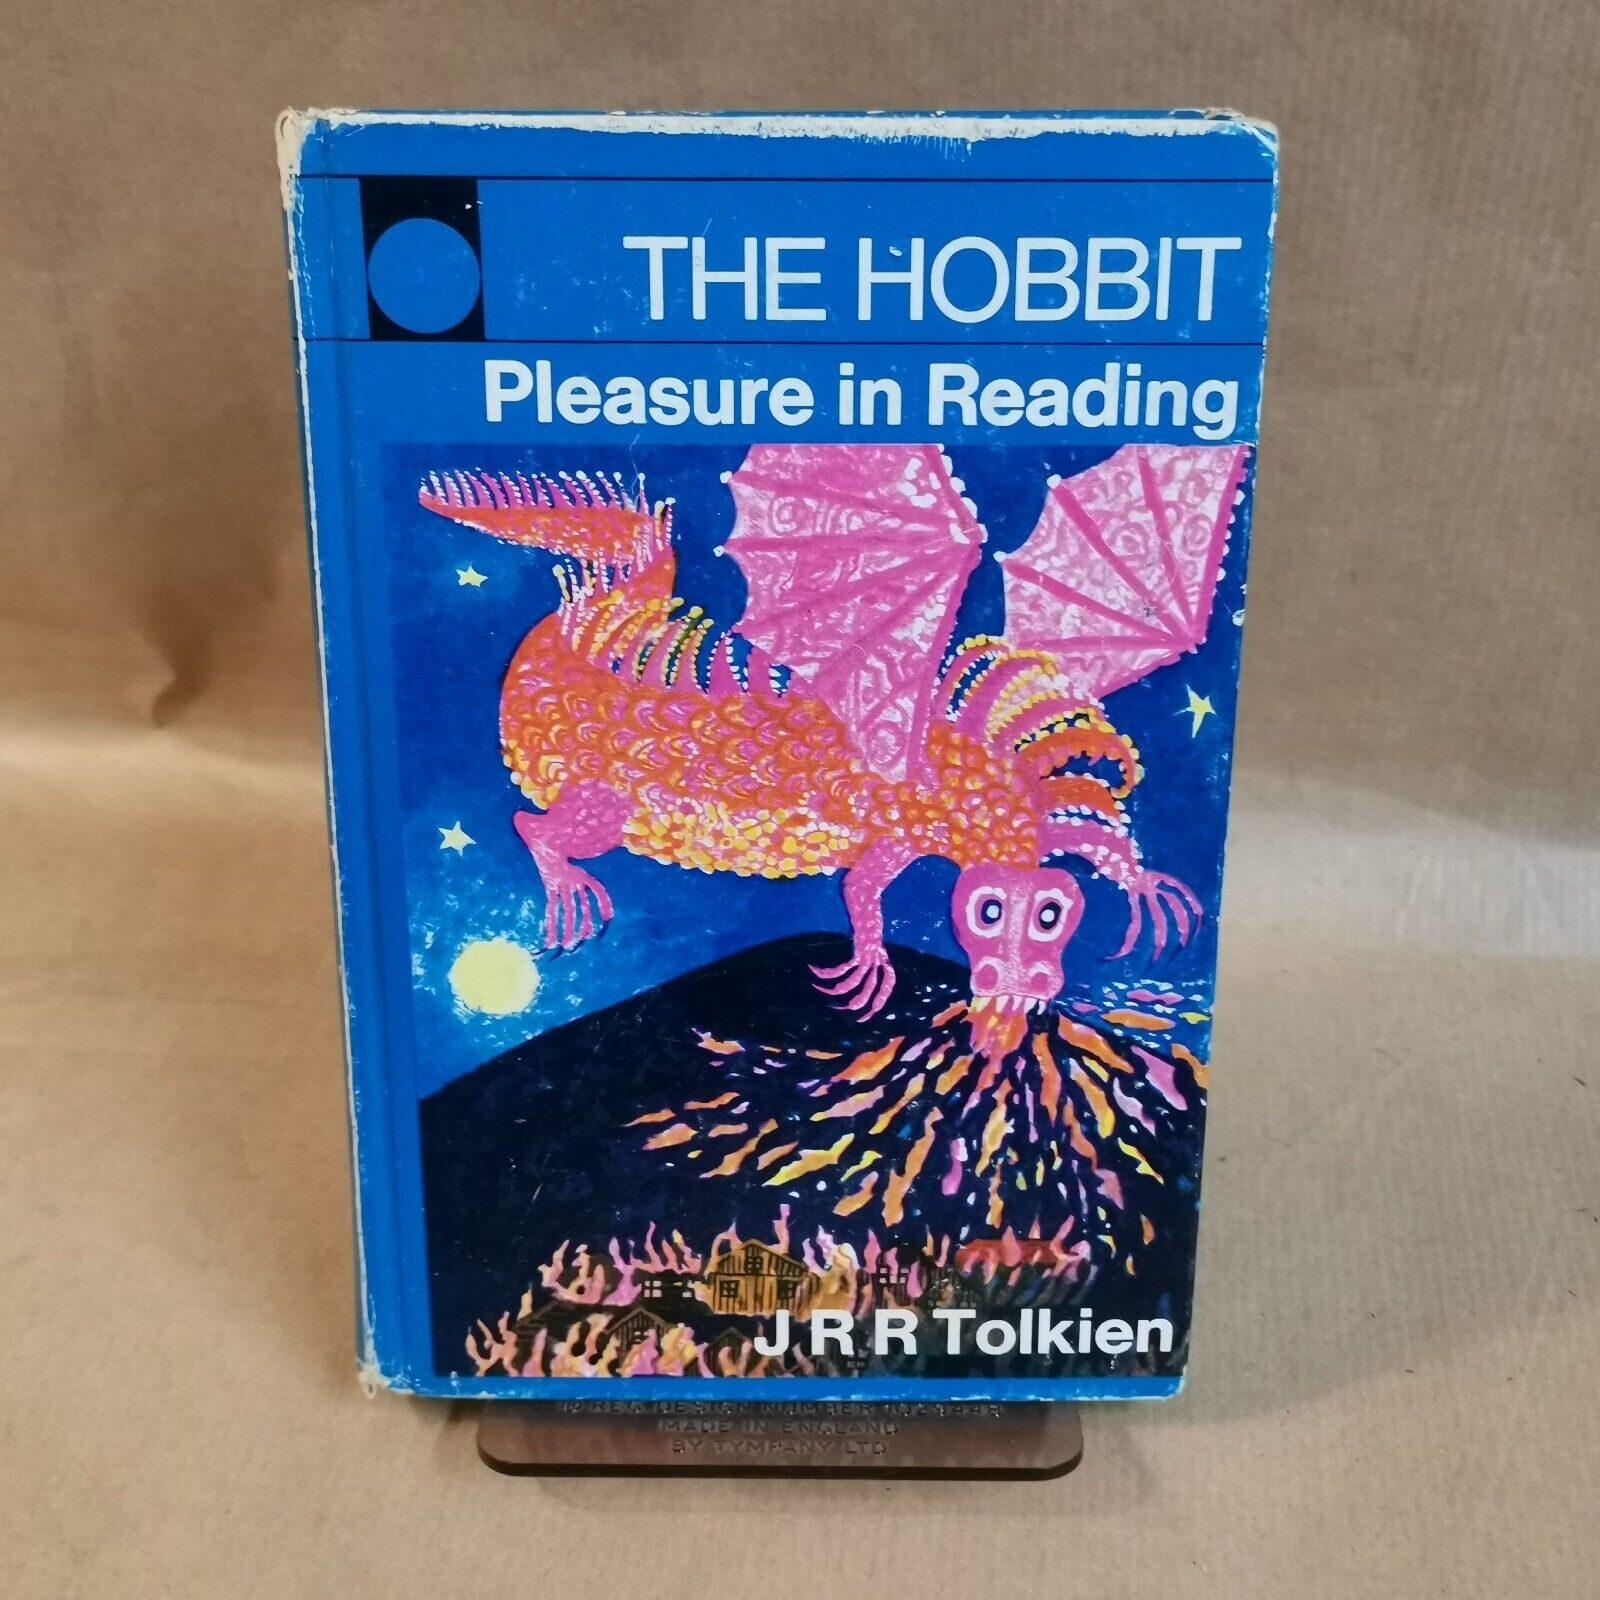 most valuable Lord of the Rings collectible: The Hobbit first edition